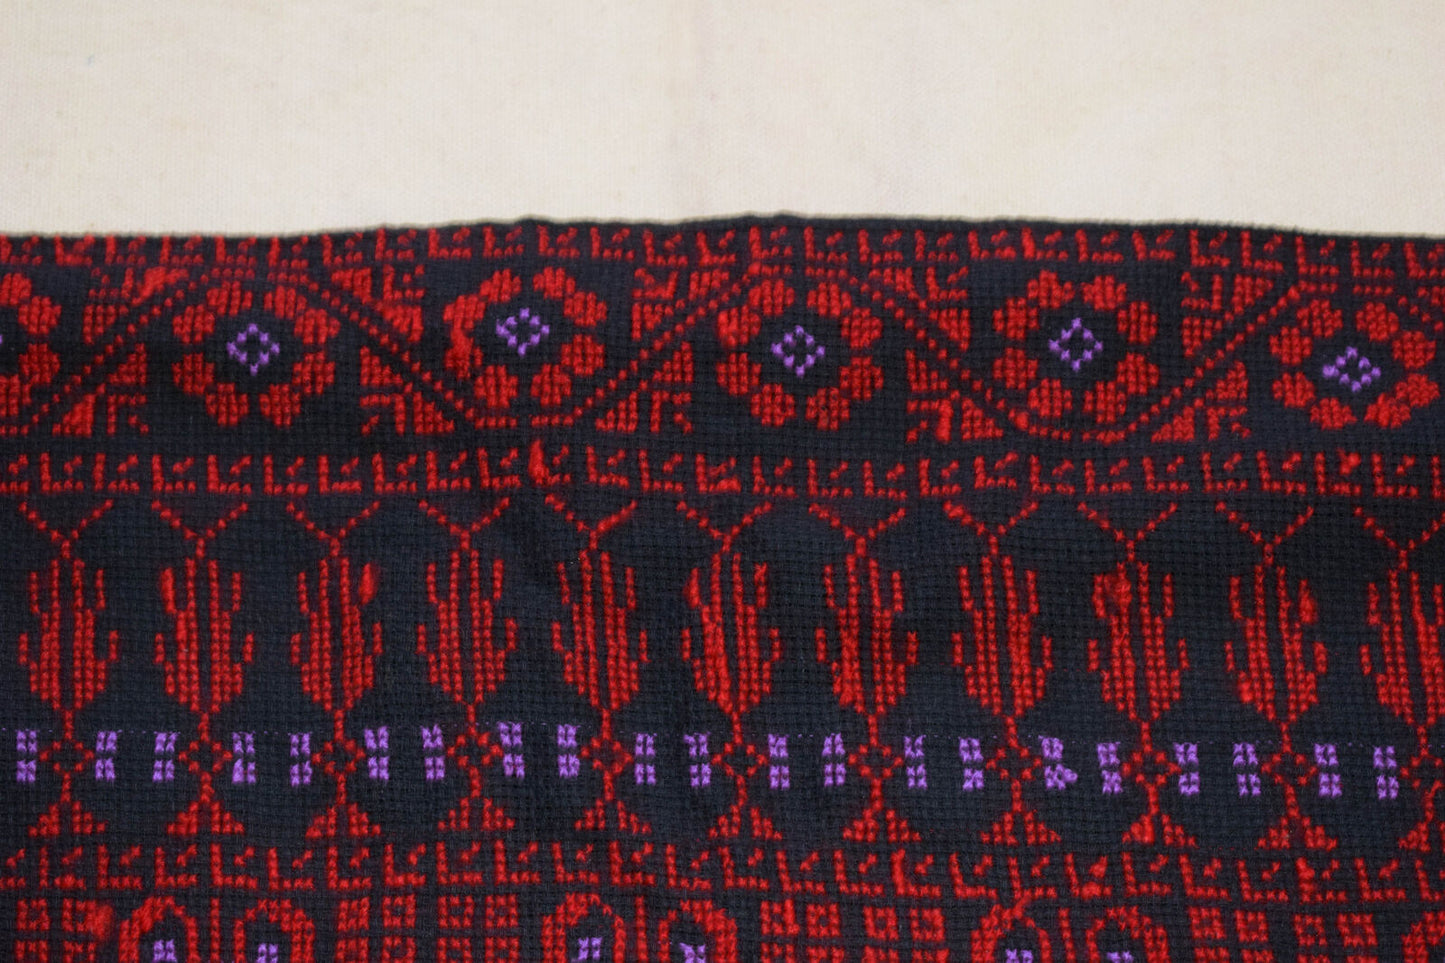 Hand Stitched embroidered Egyptian / Palestinian Bedouin Wrap Shawl Scarf